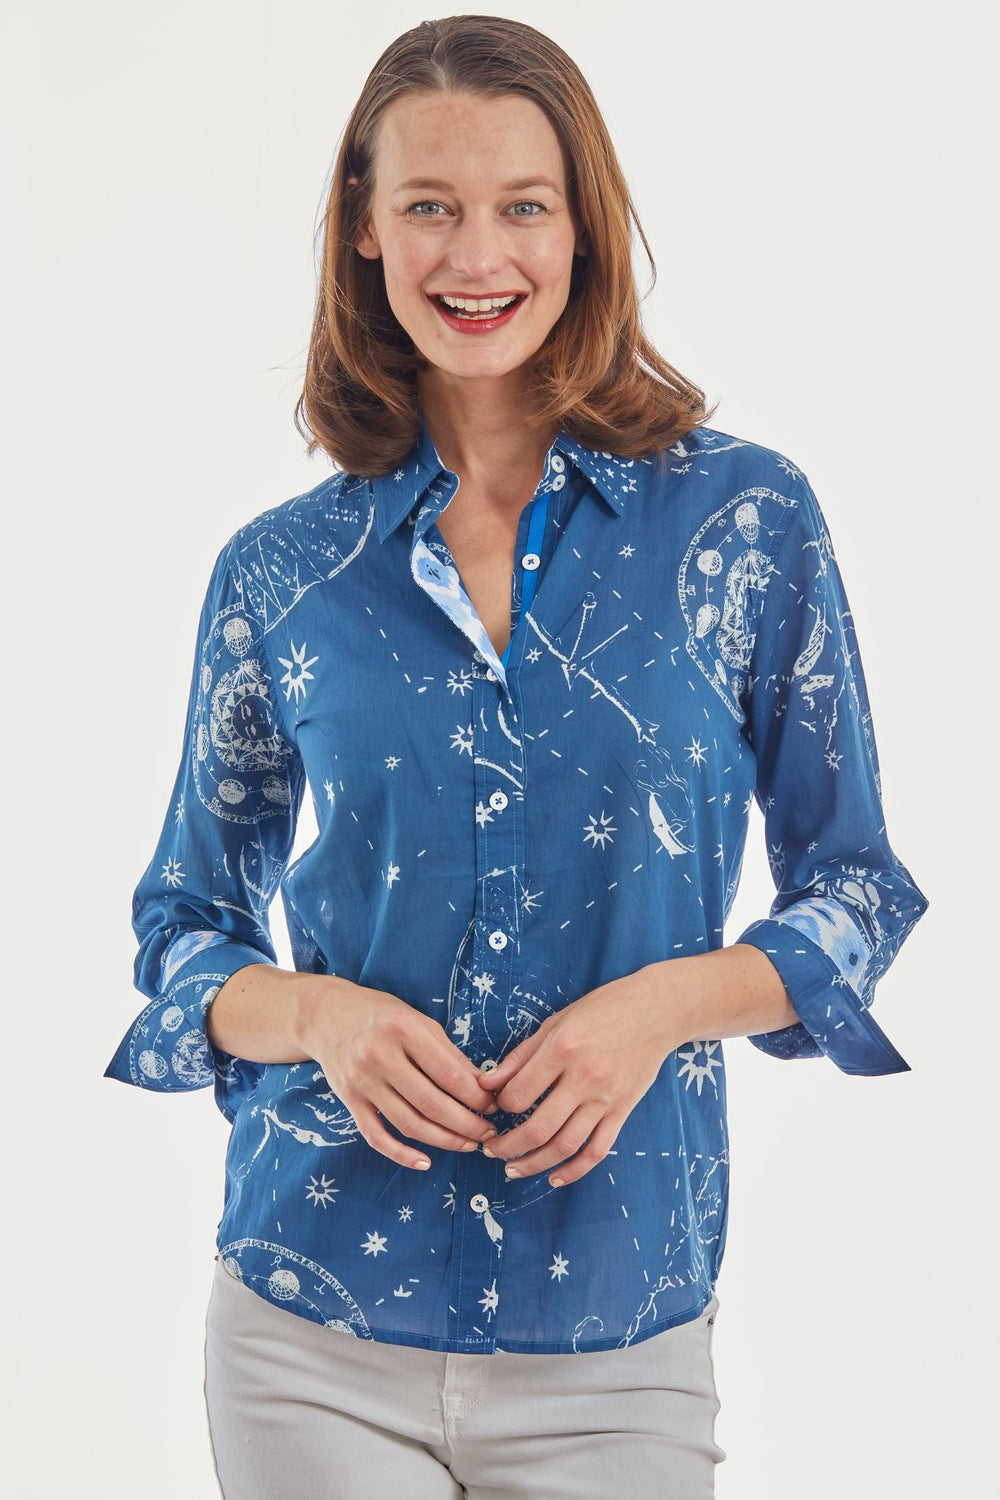 Dizzy-Lizzie Rome Shirt With 3/4 Sleeves - Navy Constellation Print